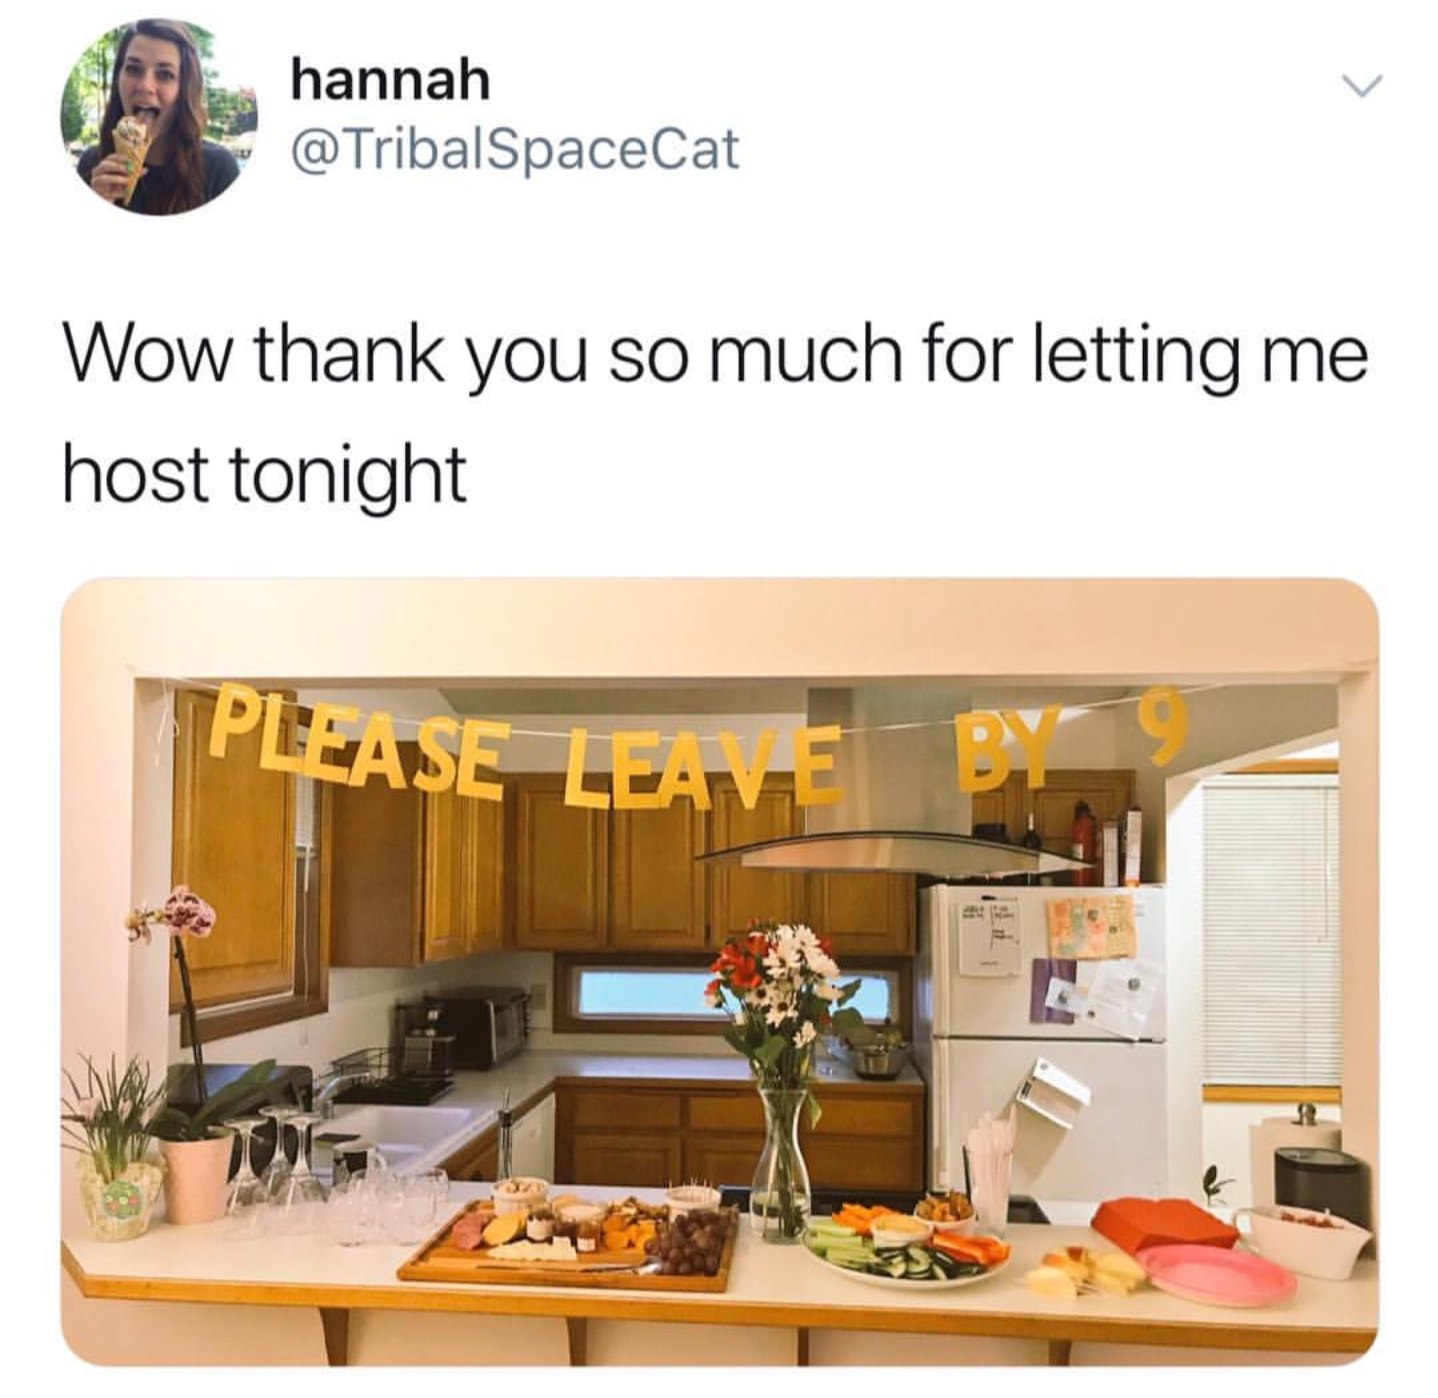 please leave by 9 meme - hannah Wow thank you so much for letting me host tonight Pelaseteana